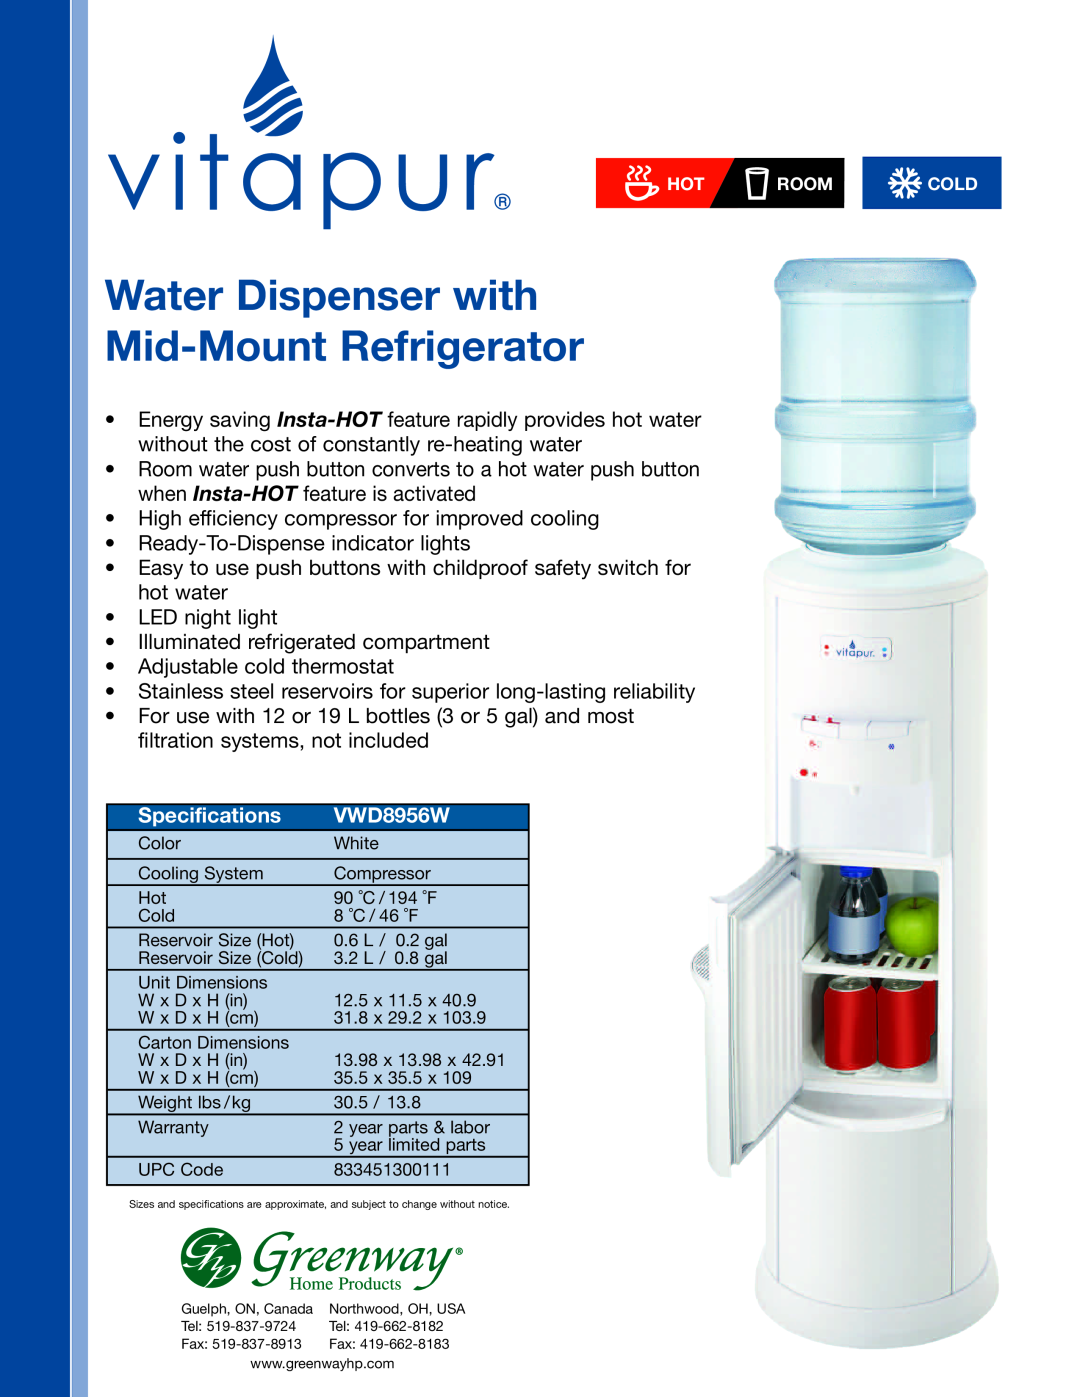 Greenway Home Products VWD8956W specifications Water Dispenser with Mid-Mount Refrigerator, Specifications 